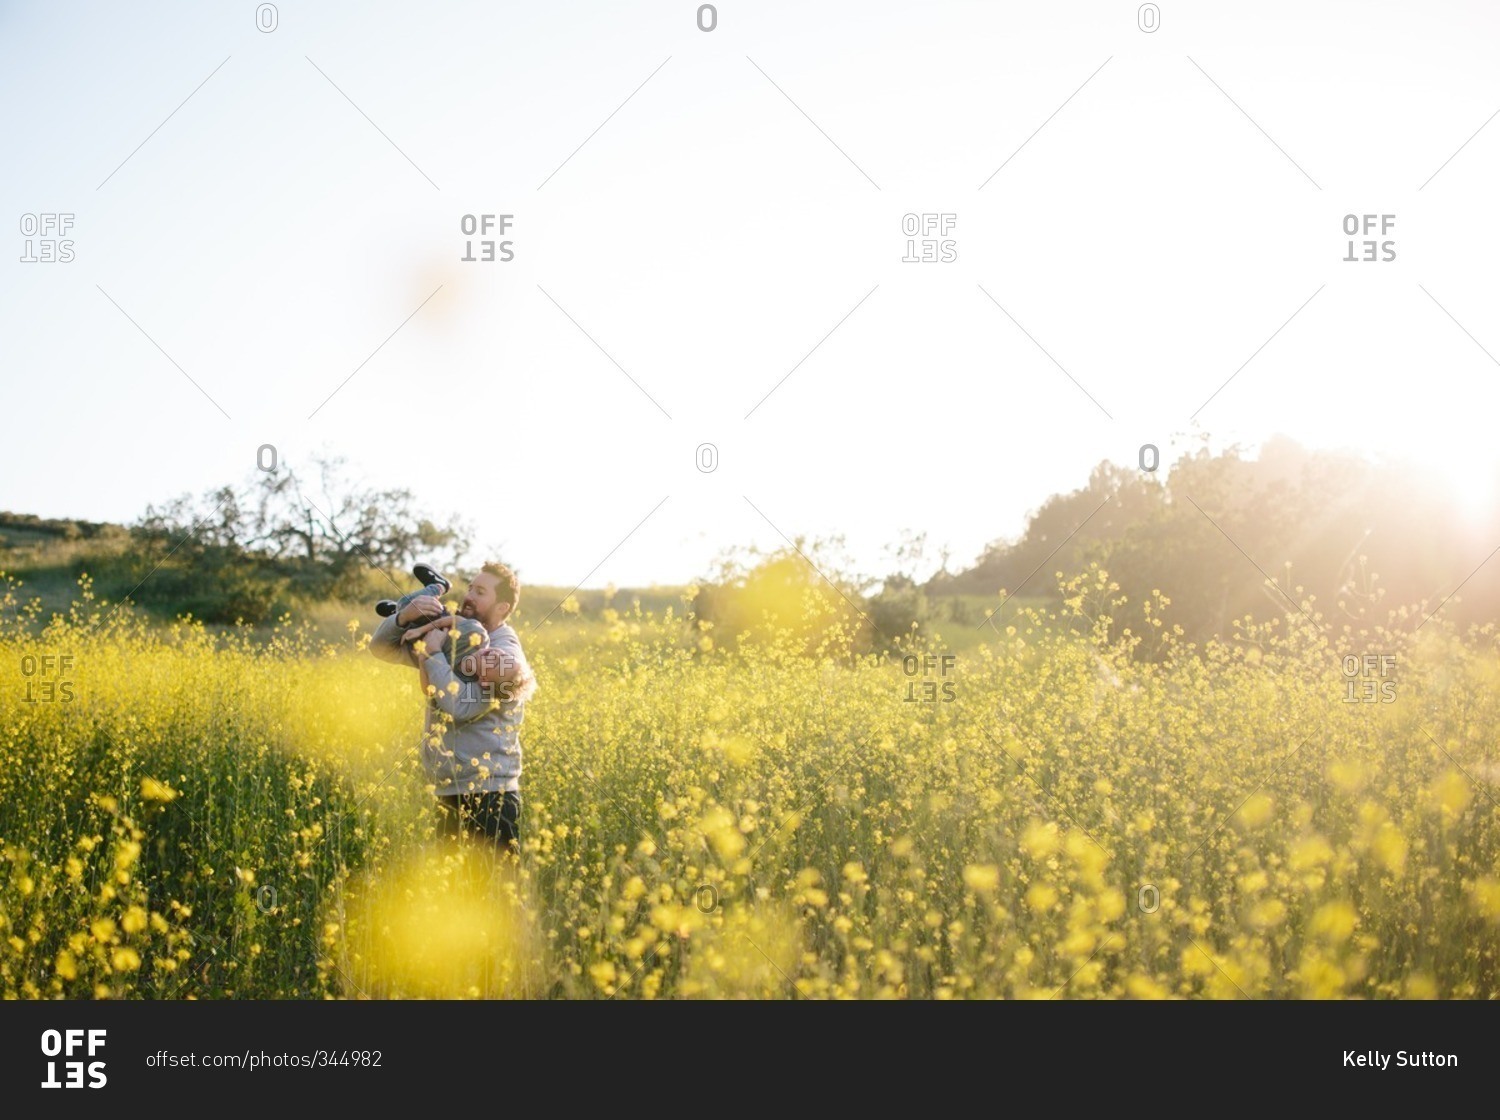 Father playing with young son in sunlight field of yellow flowers